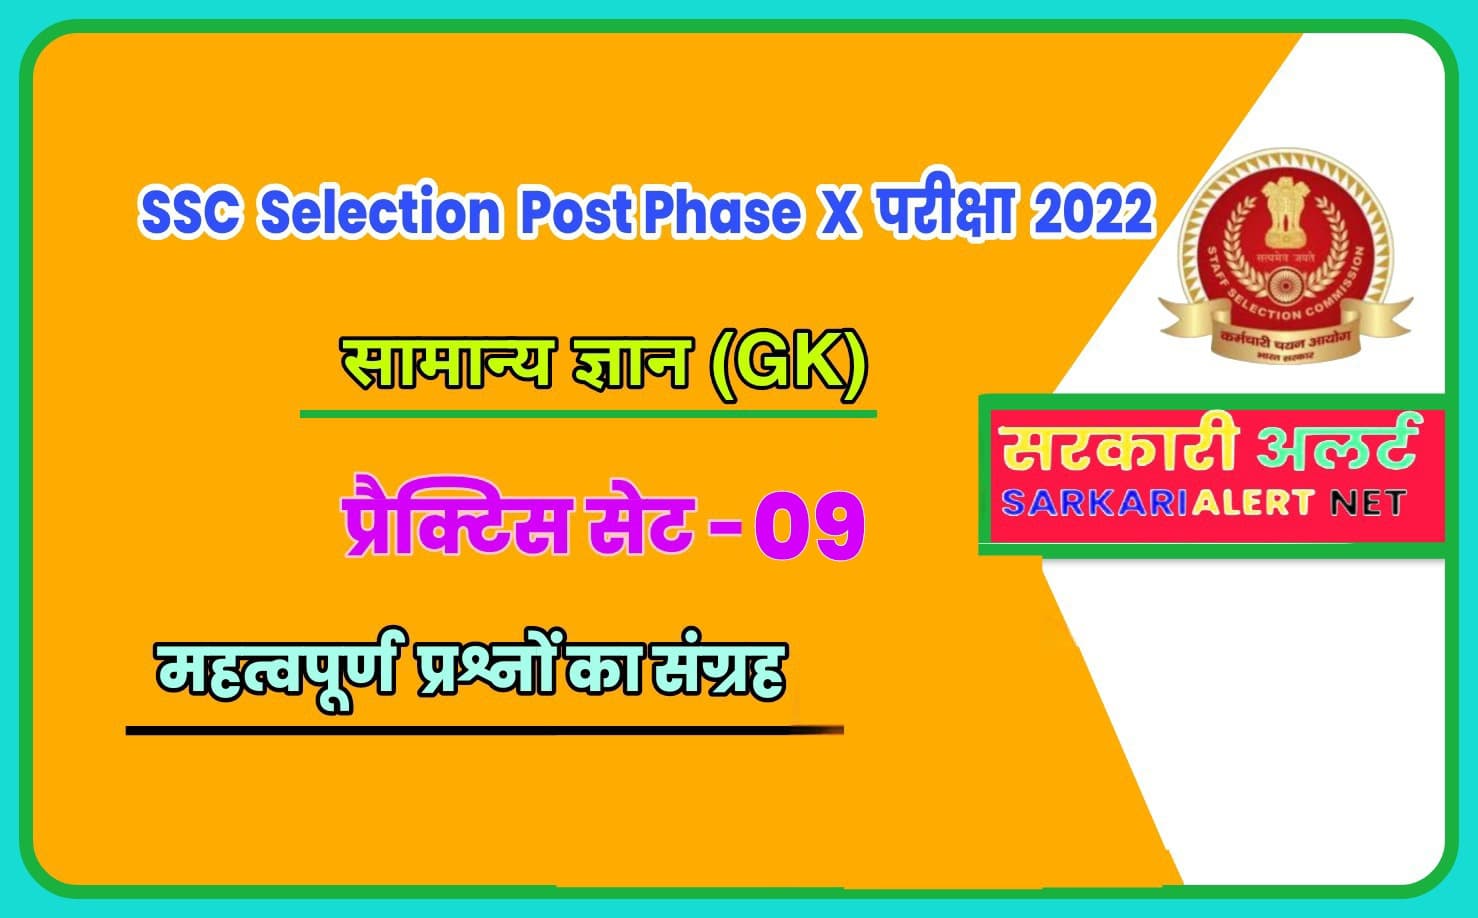 SSC Selection Post Phase X General knowledge Practice Set 09